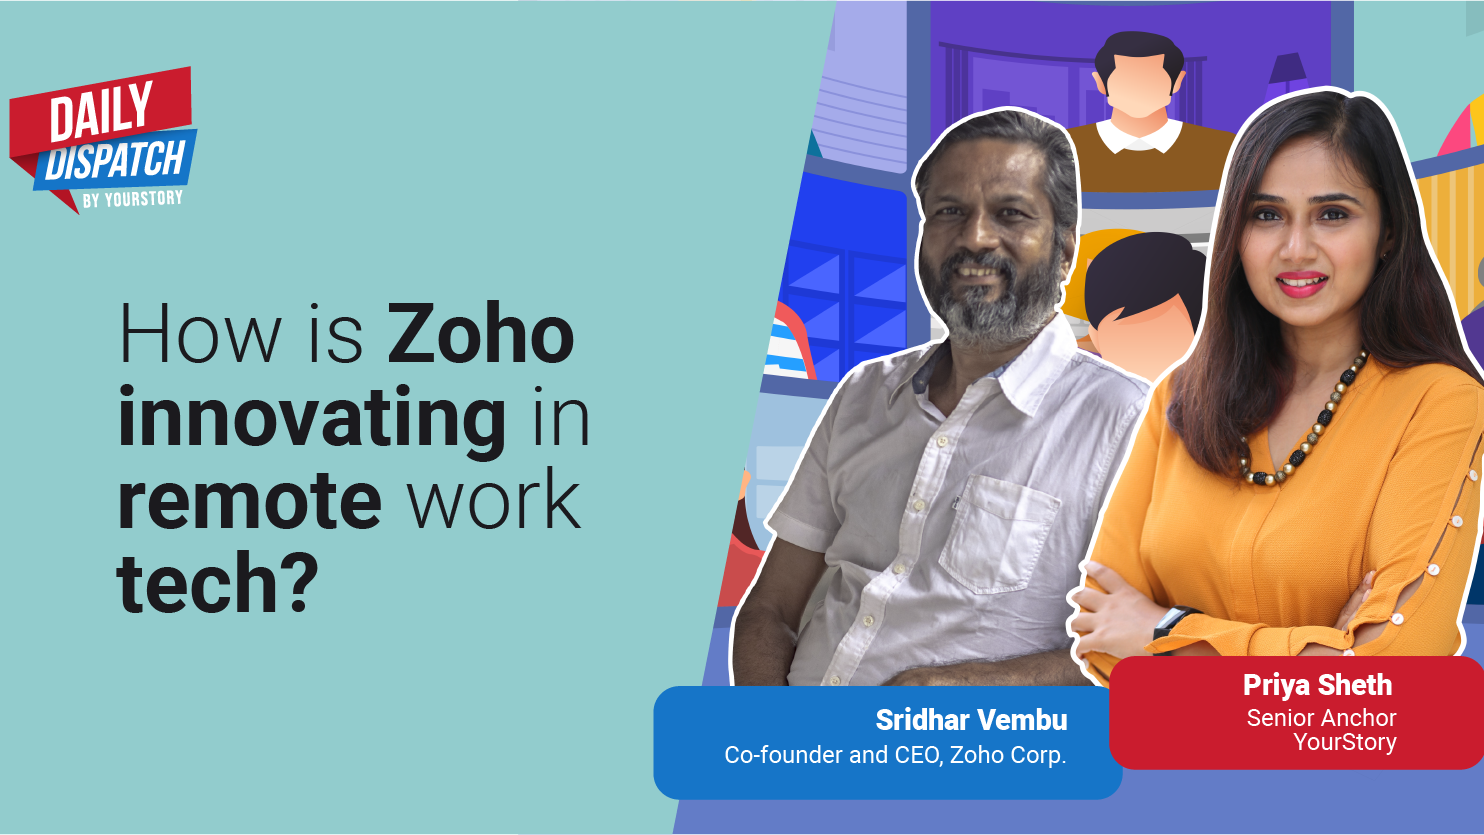 How Sridhar Vembu is steering Zoho Corp to become one of the top technology players in the world